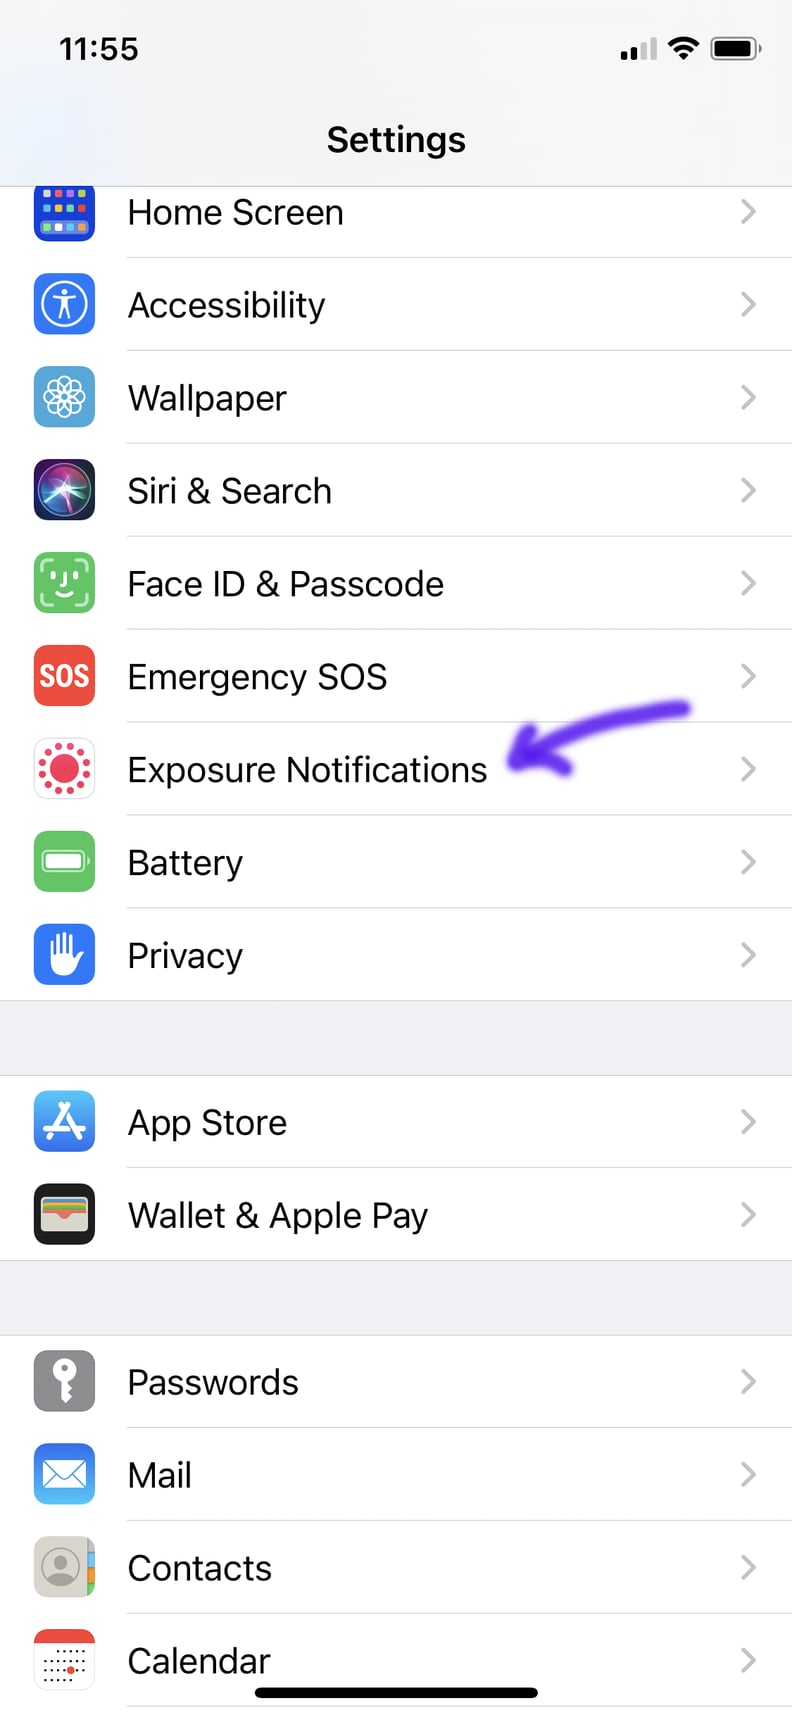 Start by Going to Your Phone Settings and Searching For "Exposure Notifications"